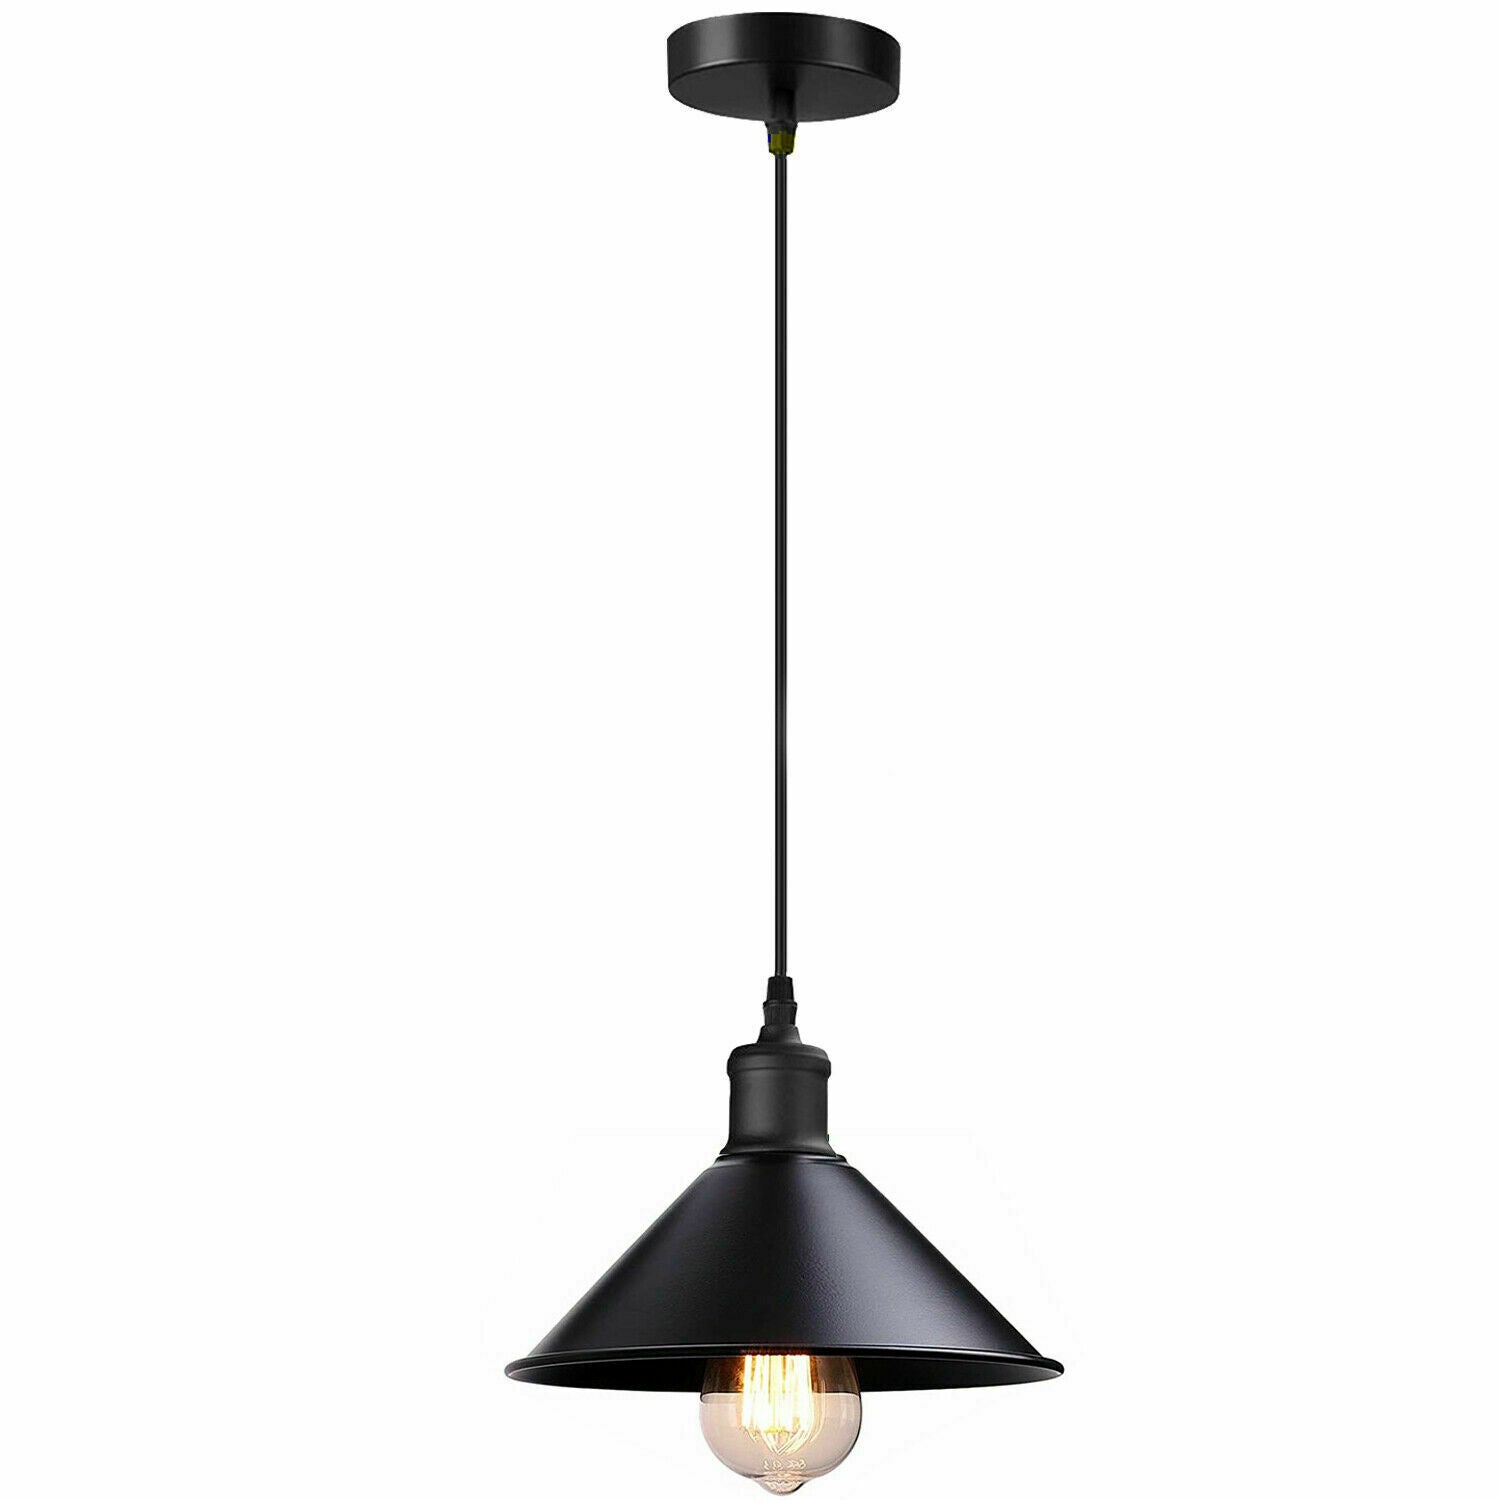 53 Inch Industrial Modern Cone Ceiling Pendant Lighting